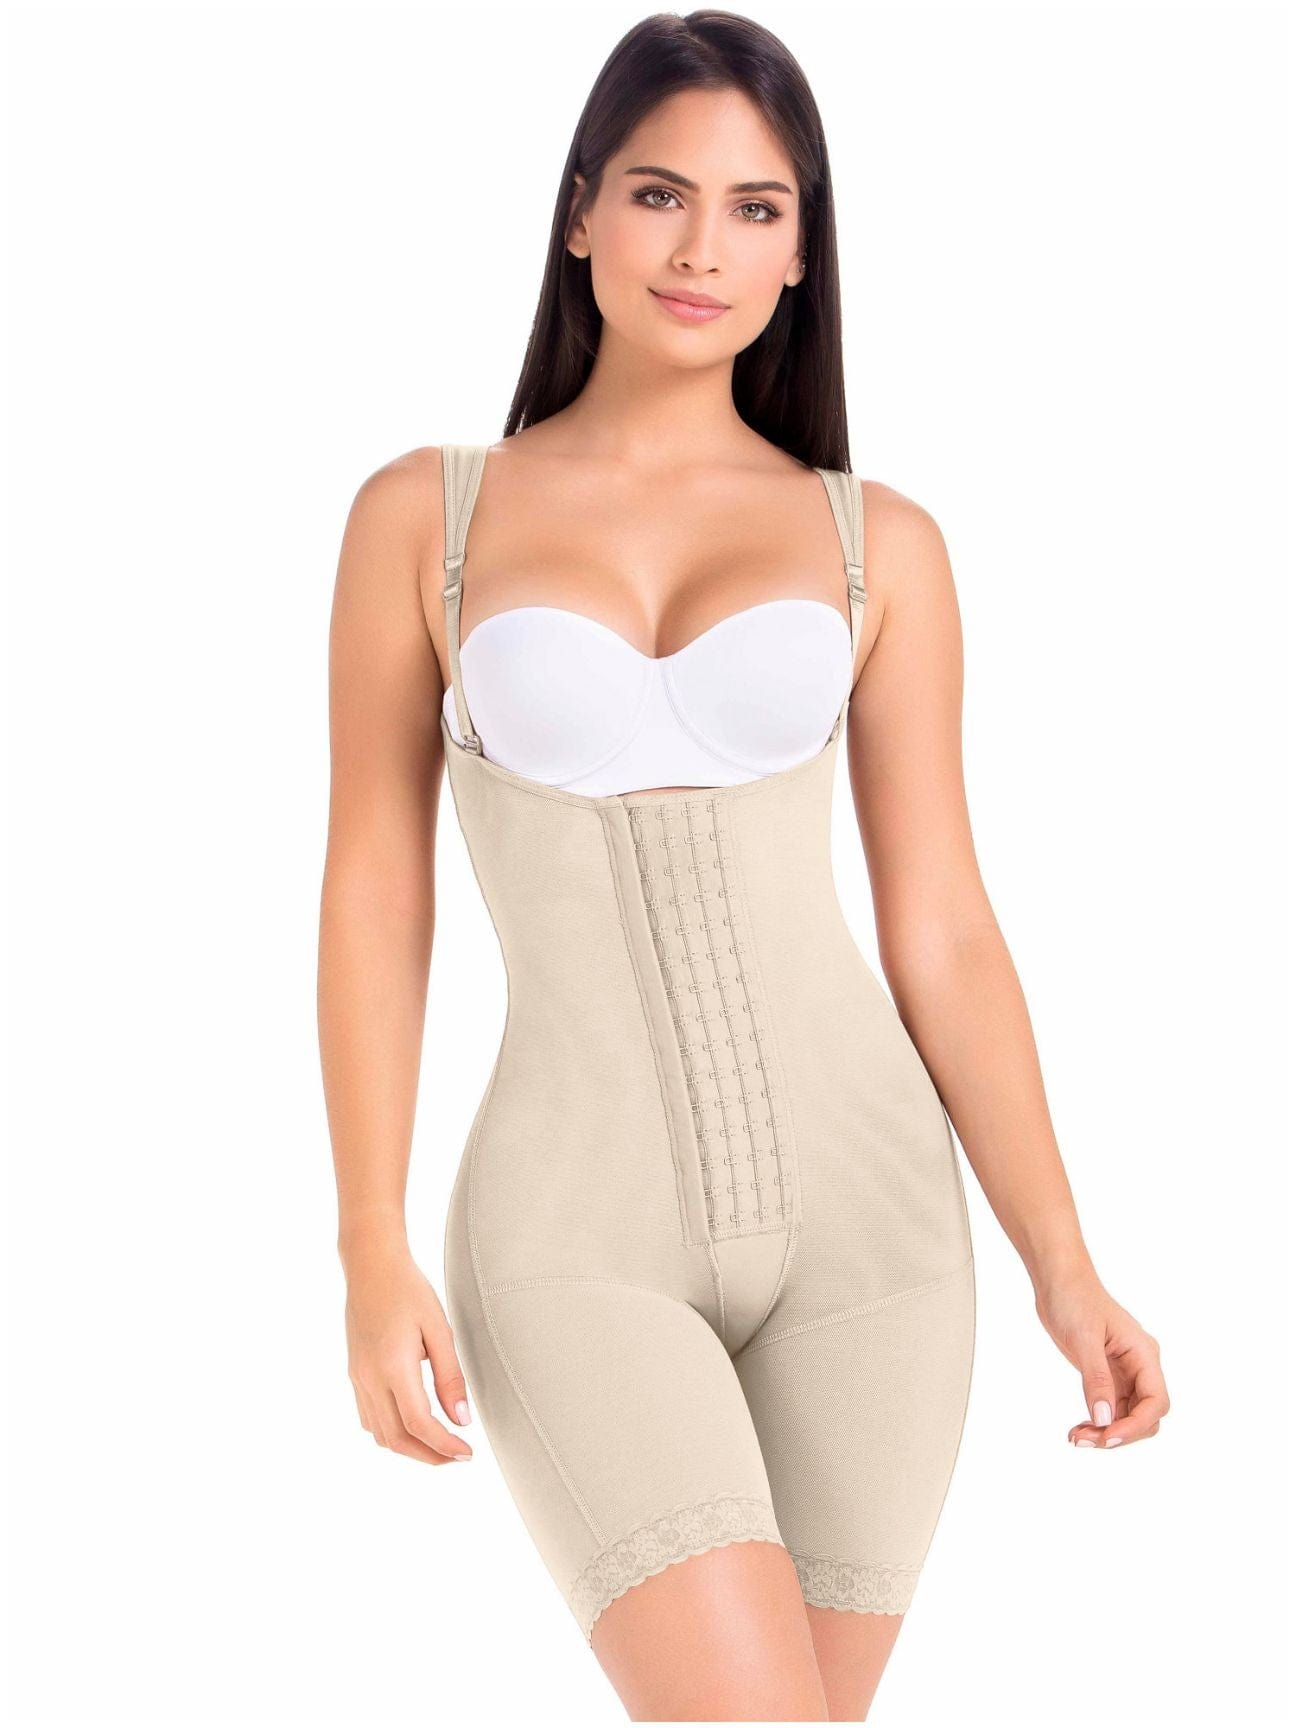 High Compression Mid Thigh Faja with Hooks full body front view beige color.